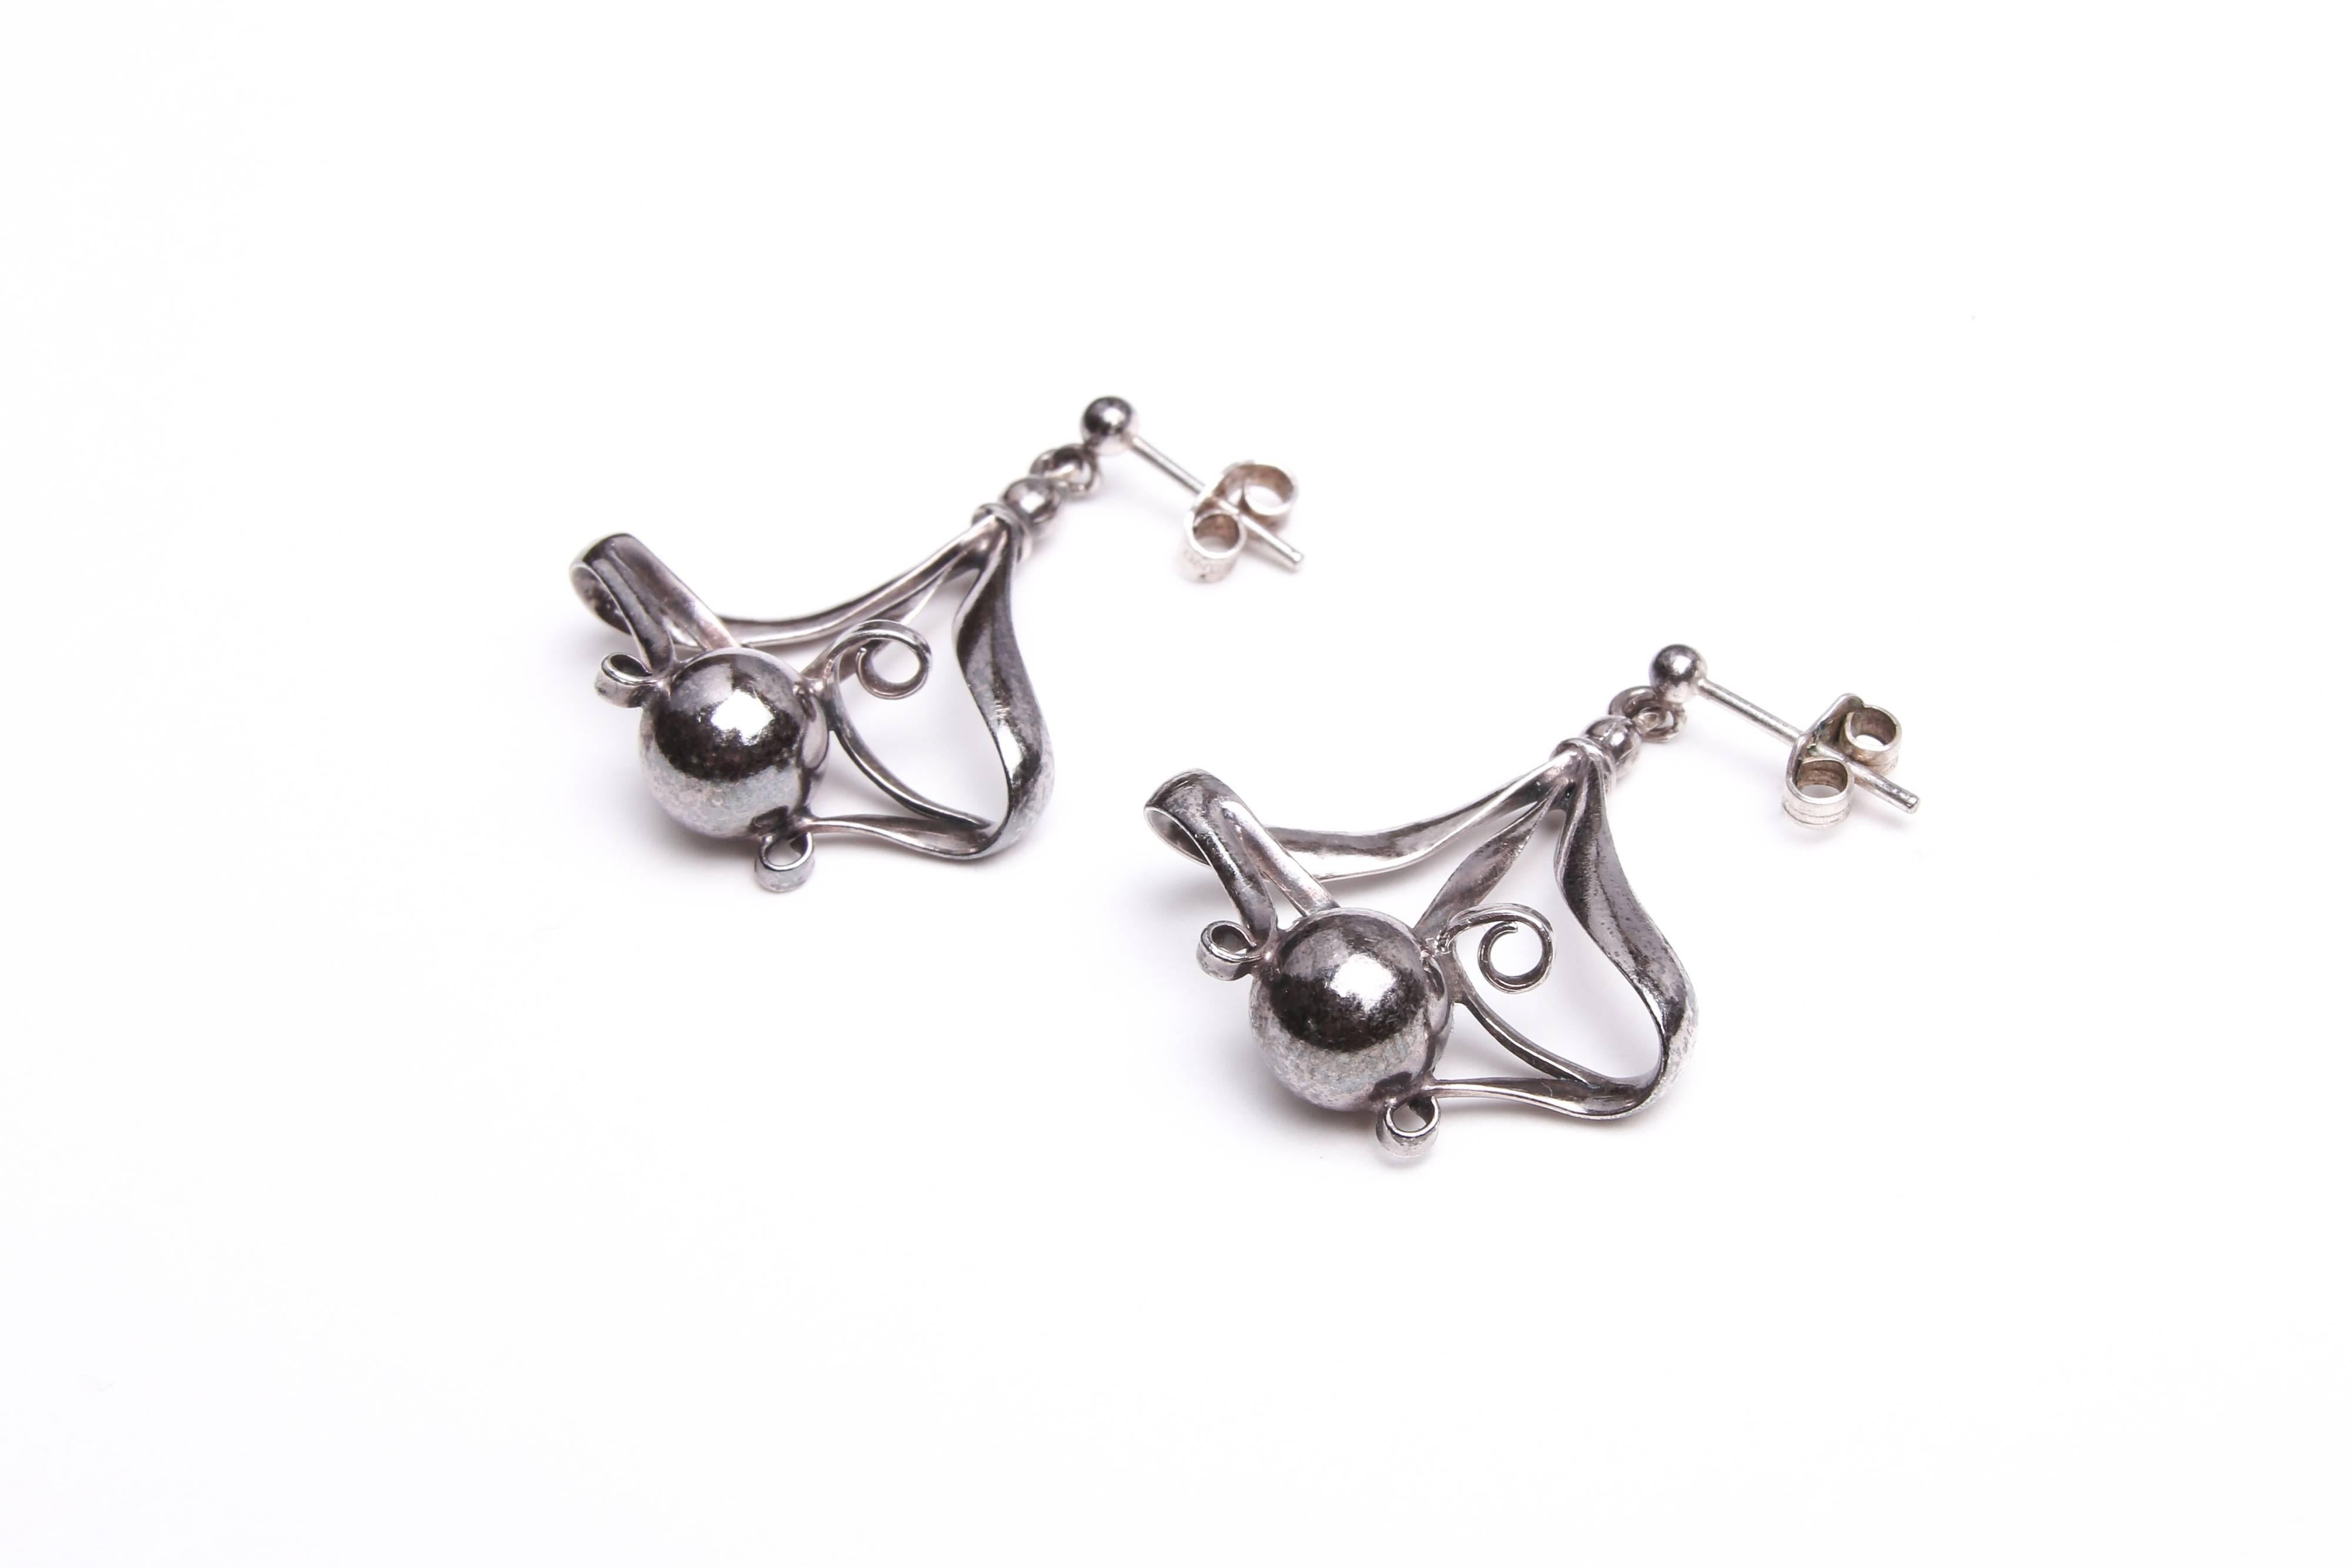 A pair of solid sterling silver antique earrings by Charles Horner in the Art Nouveau style. A rare design, comprising three strands scrolling down to a solid ball, creating a three-dimensional shape. Hallmarked. Stud fasteners with backs for